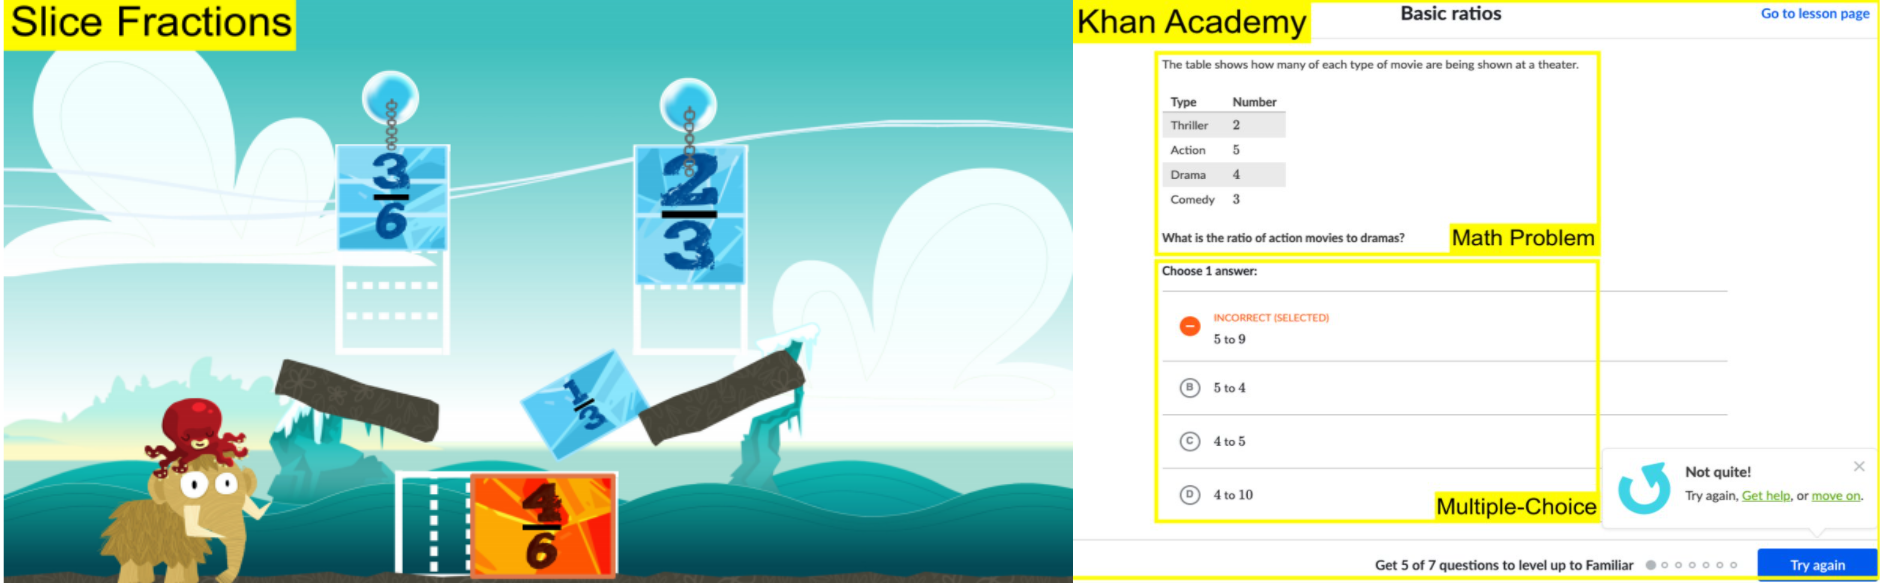 This is a screenshot of two e-learning tools that our participants used for their students: Slice Fractions and Khan Academy.